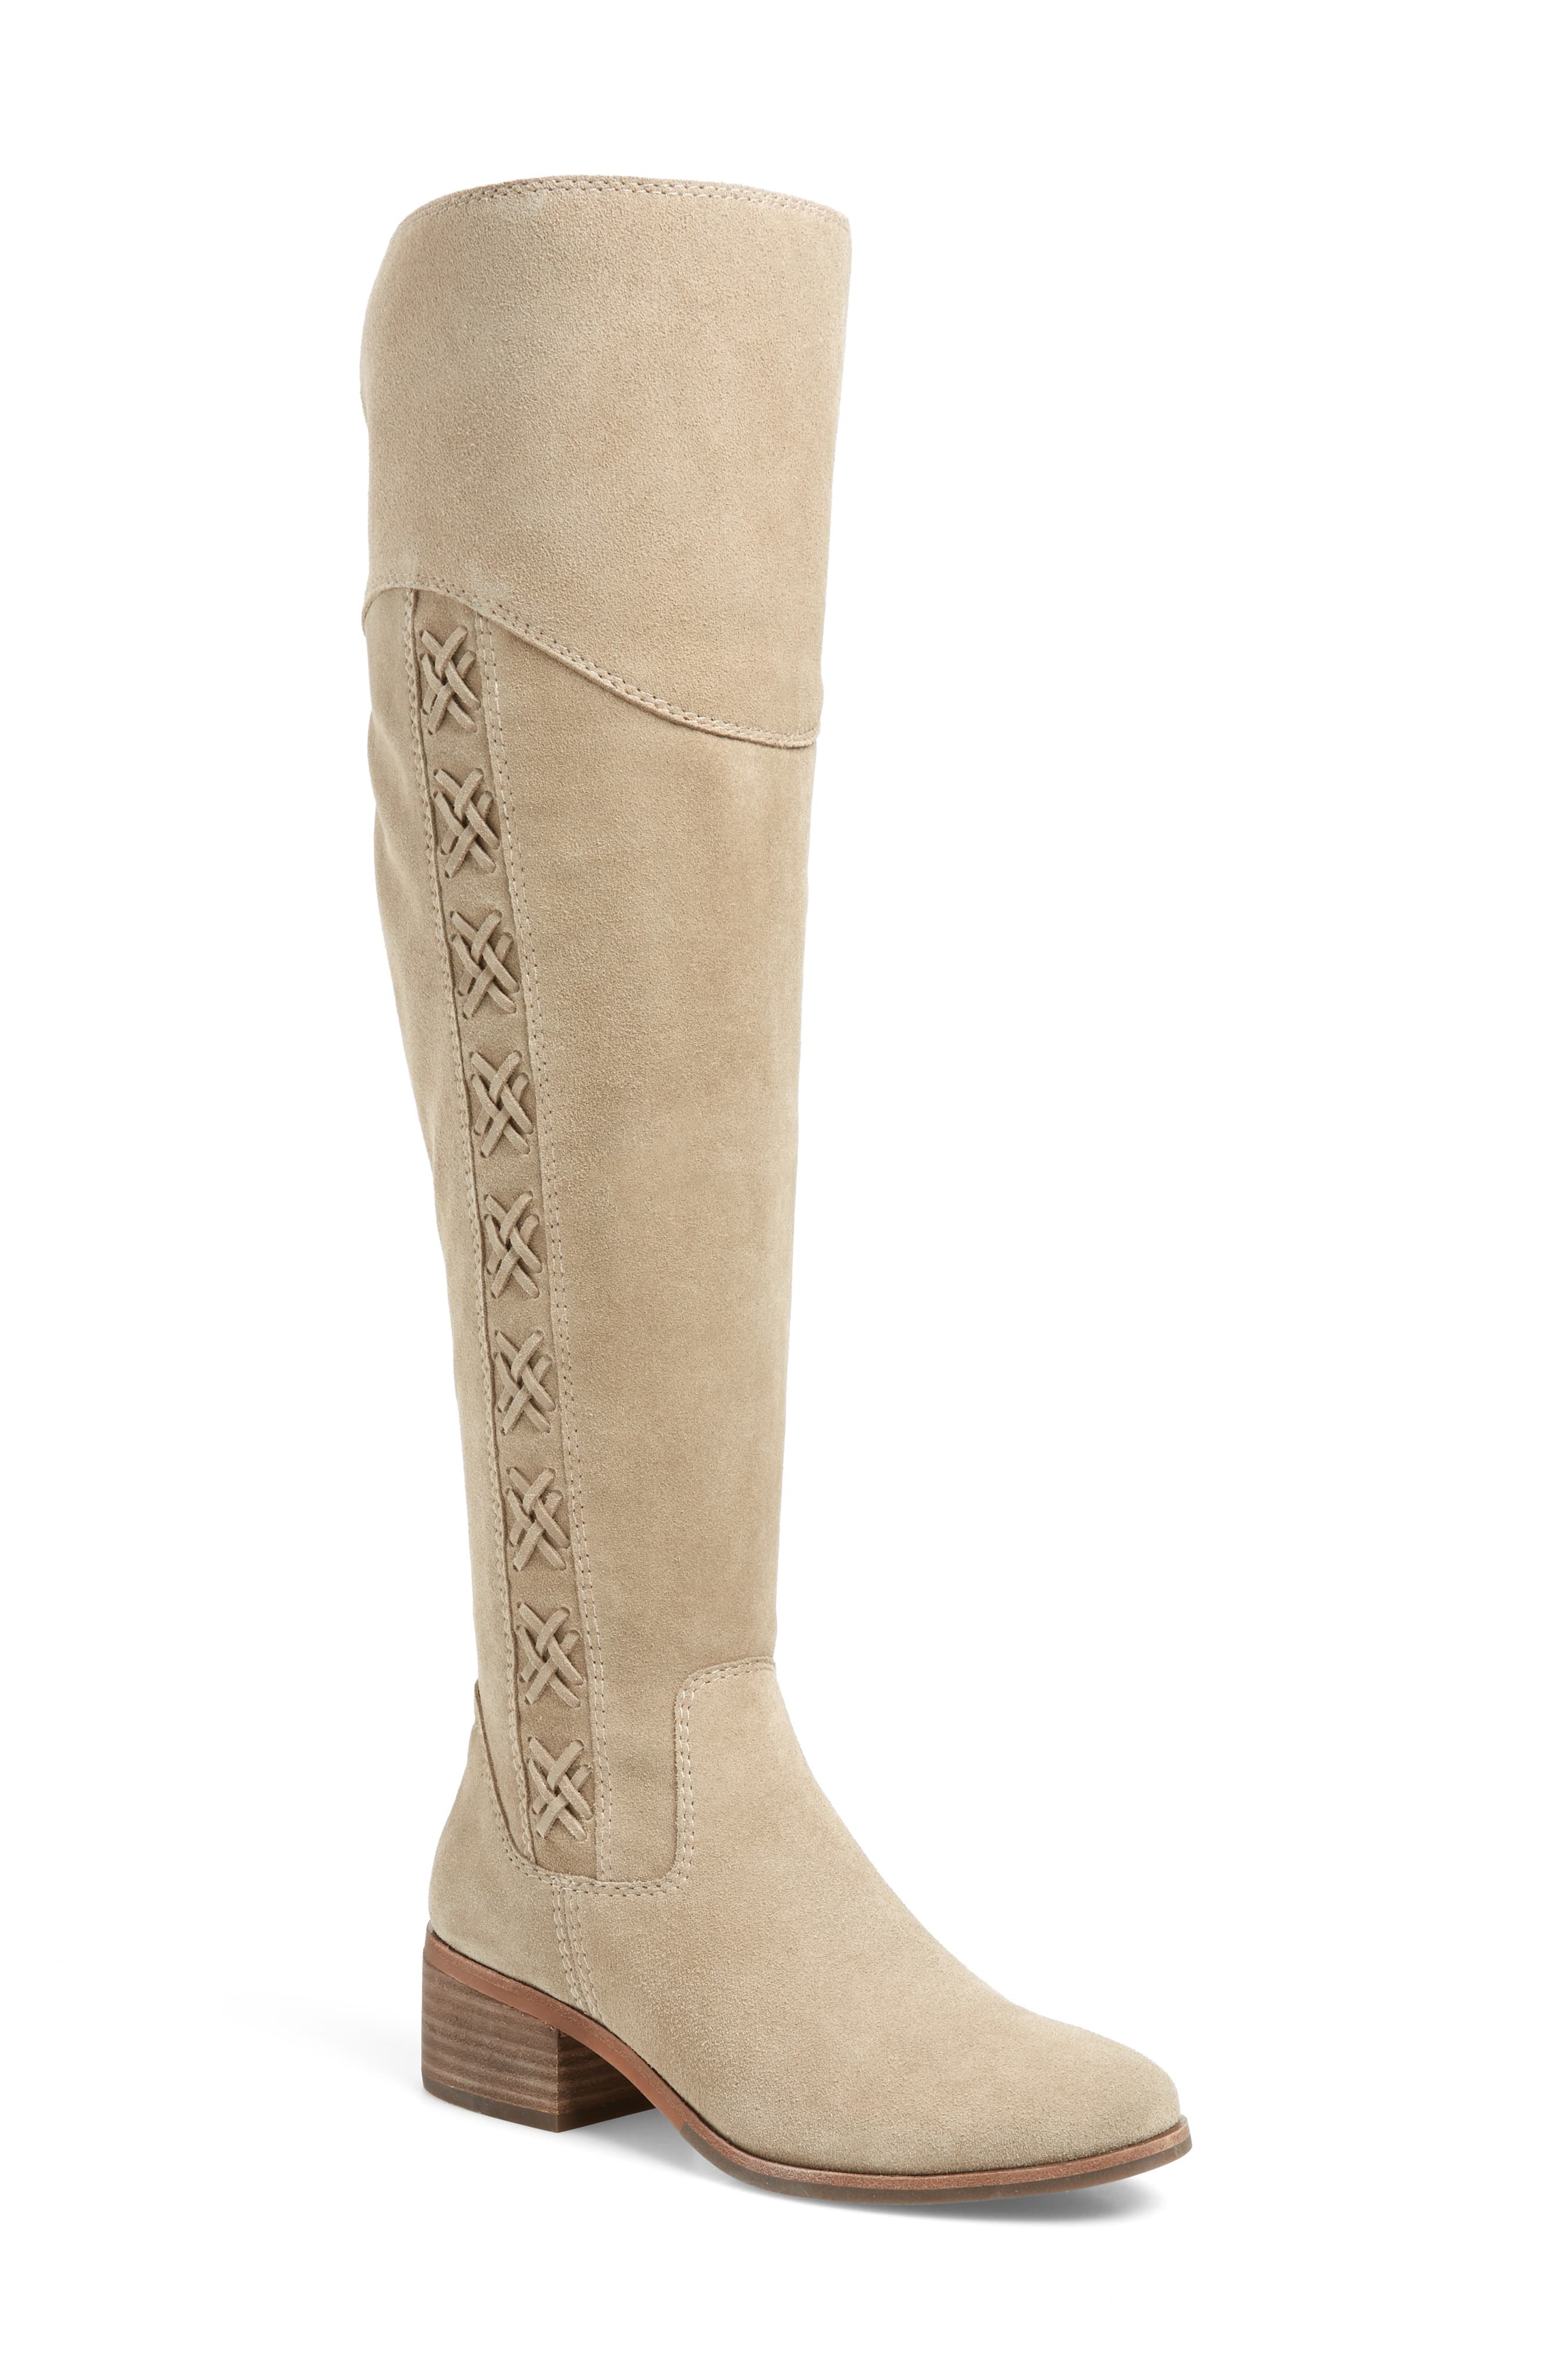 Vince Camuto Kreesell Knee High Boot 